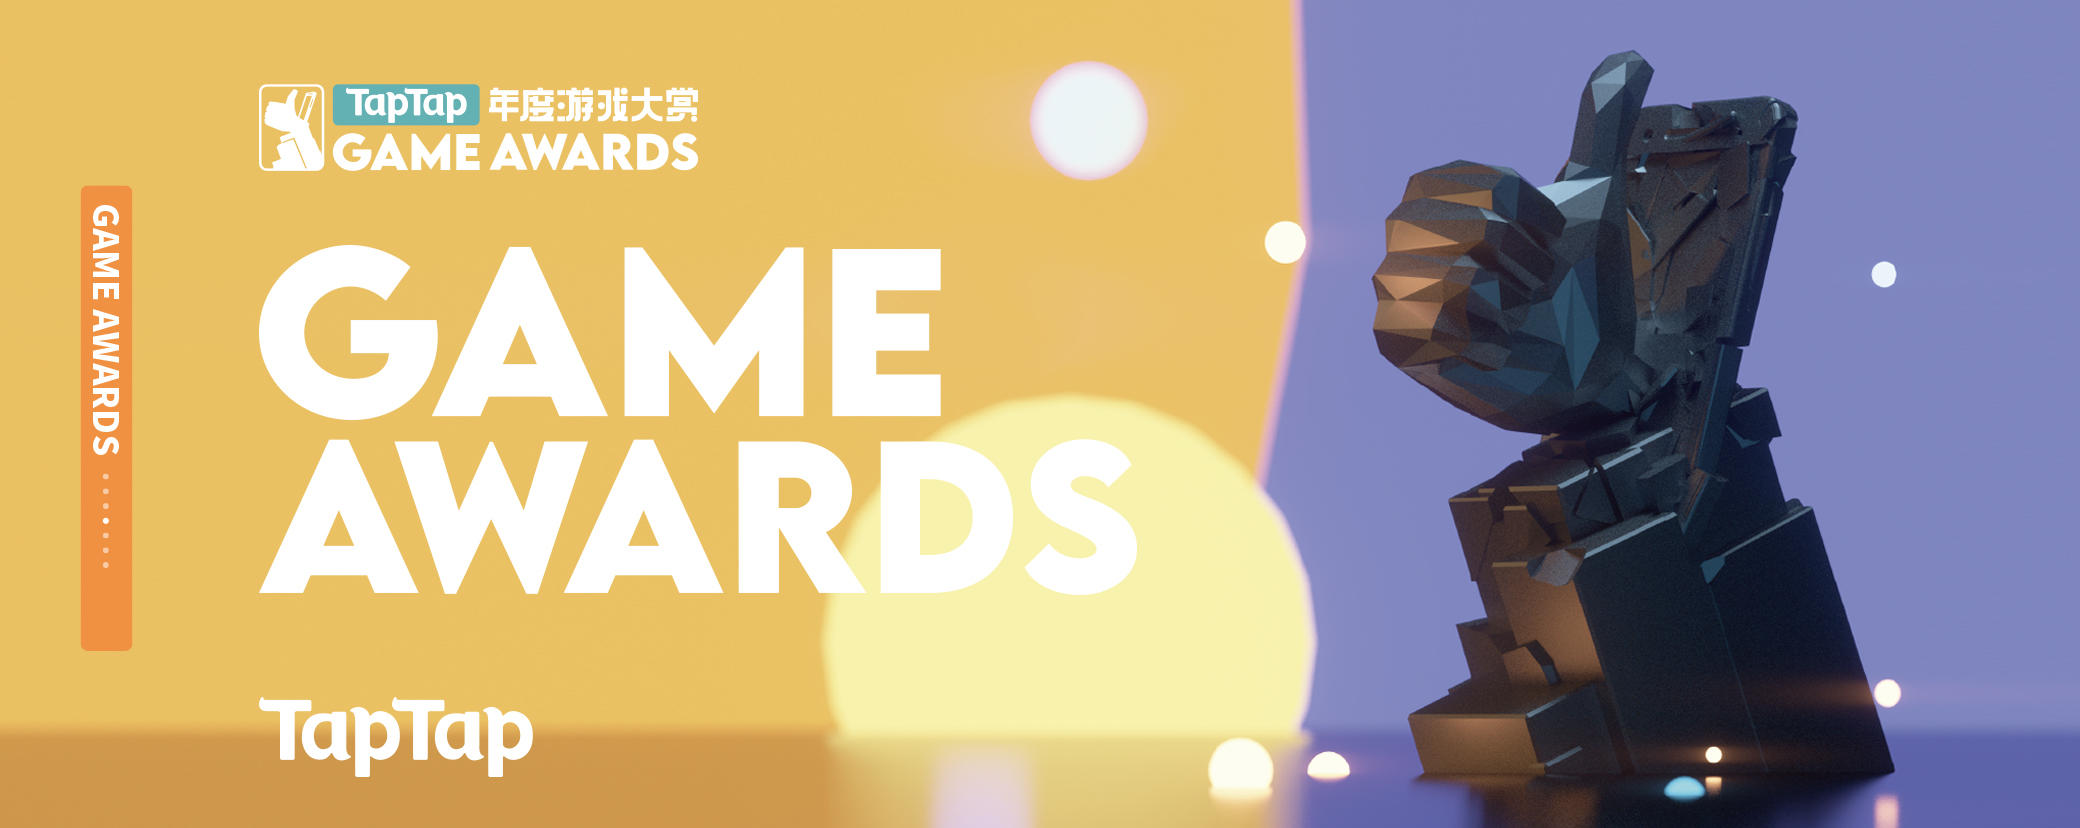 The Game Awards 2020 - Events For Gamers